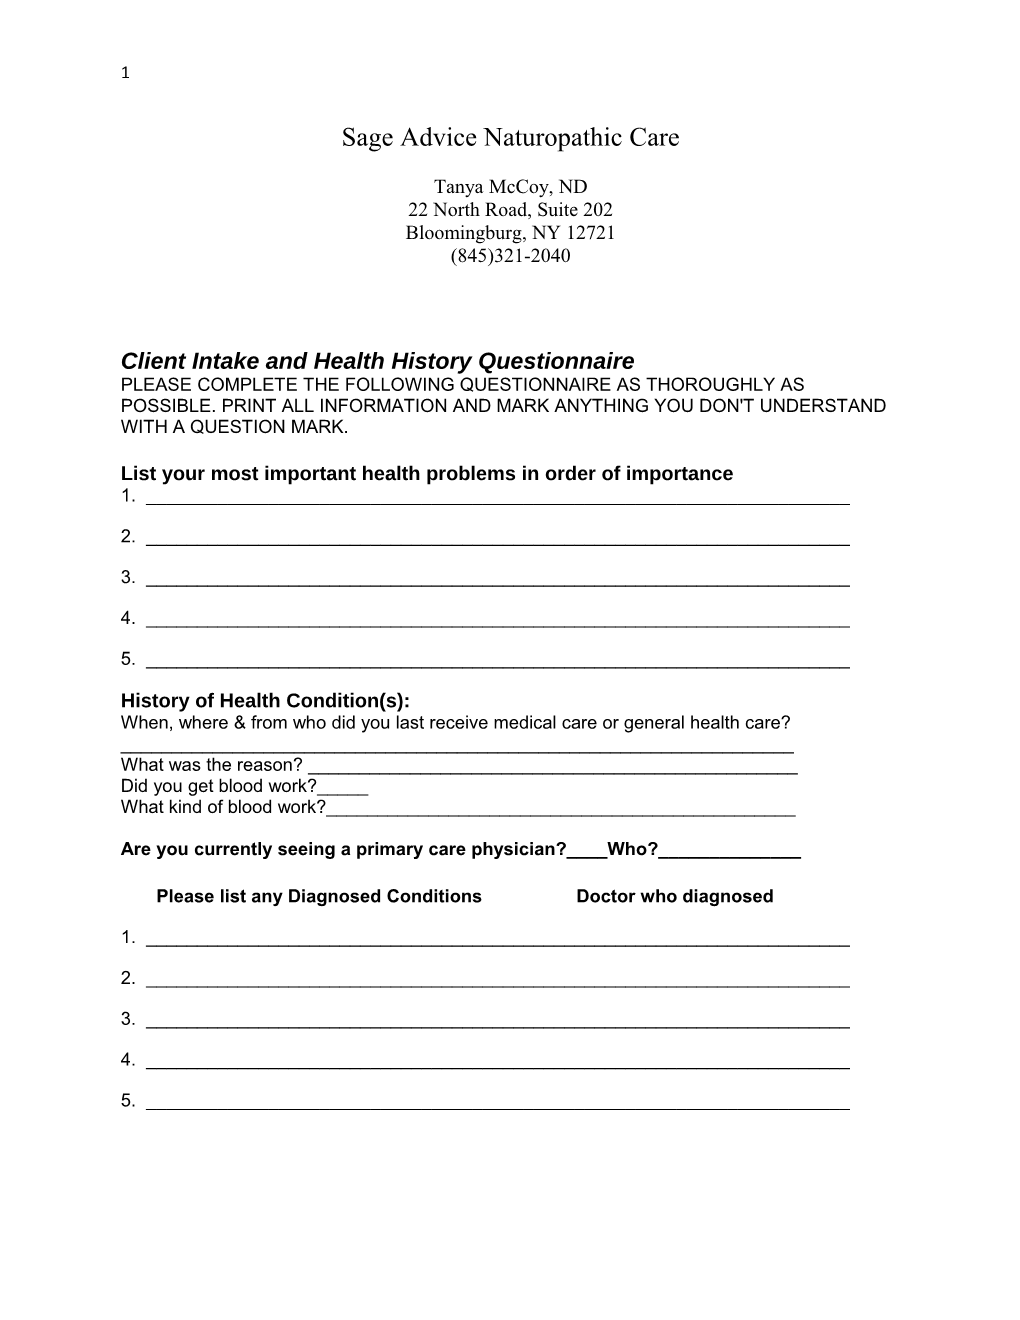 Client Intake and Health History Questionnaire